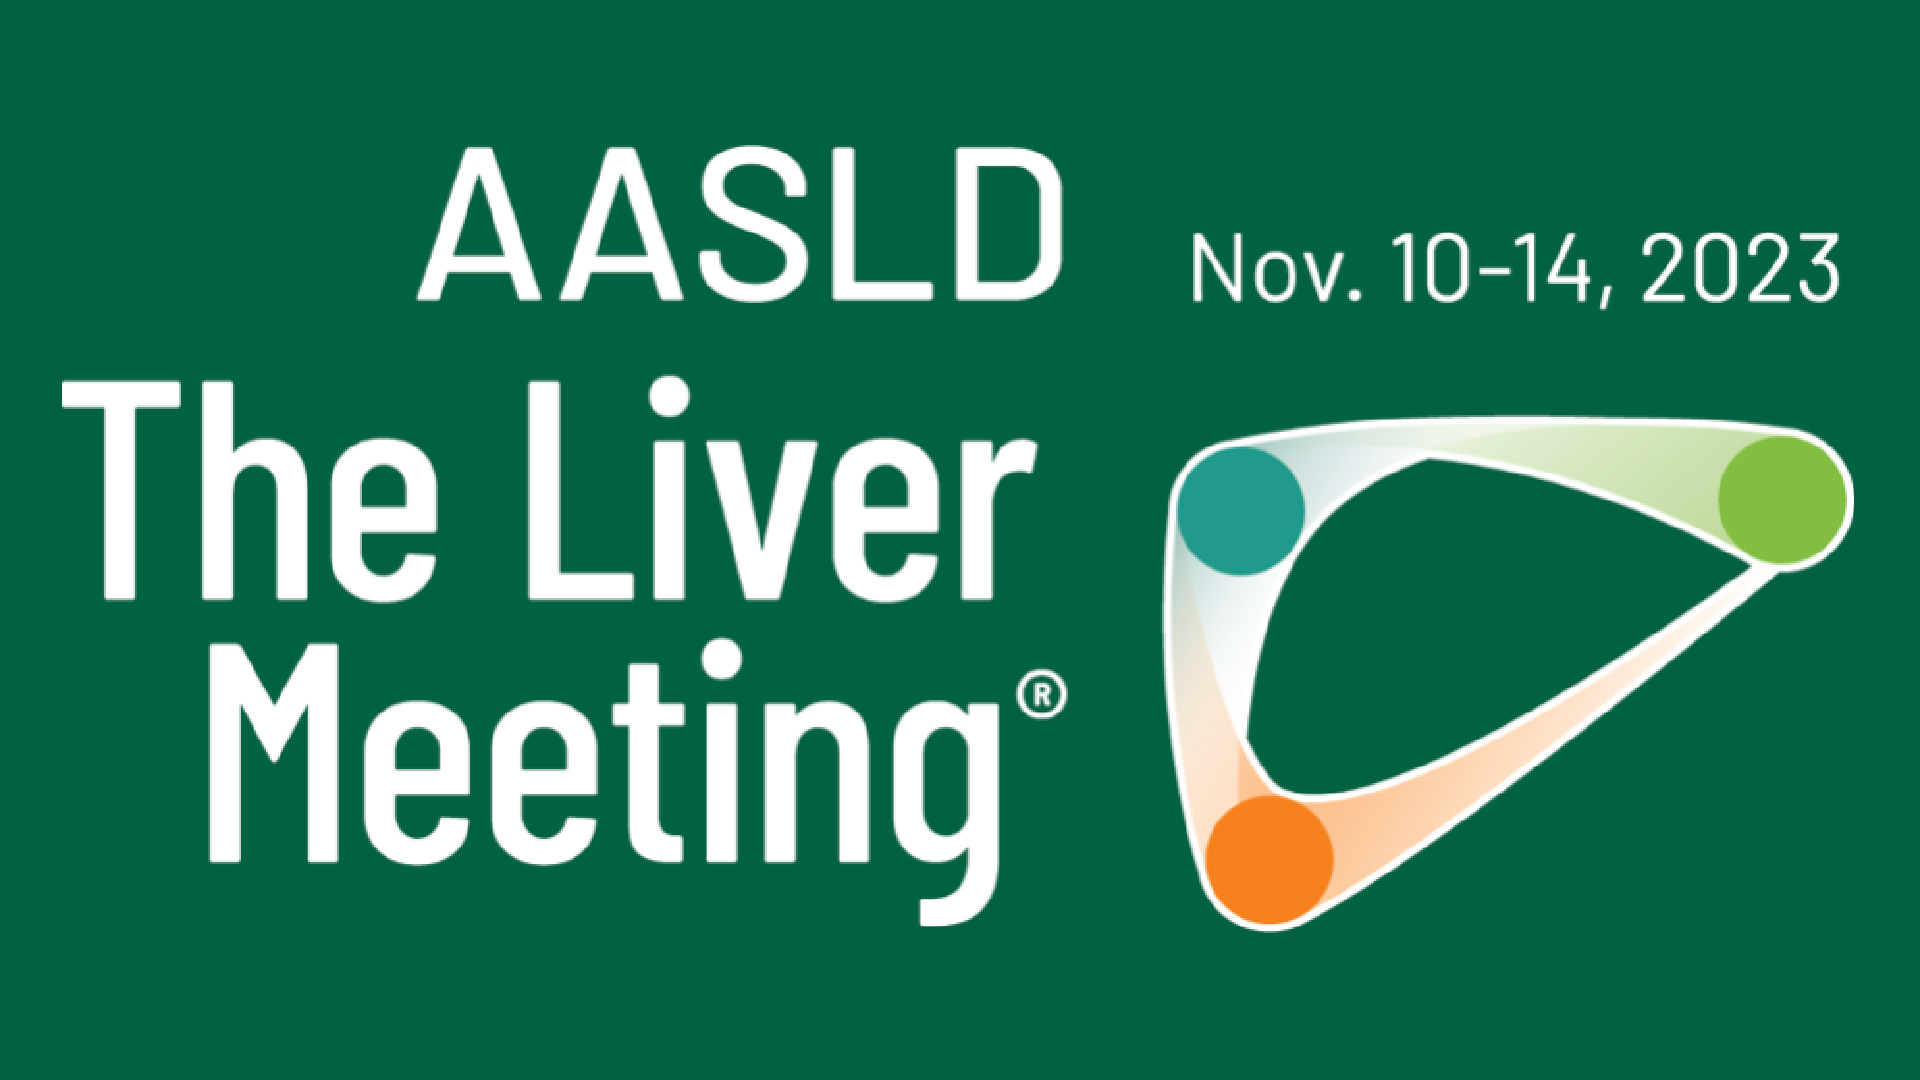 American Association for the Study of Liver Diseases (AASLD) The Liver